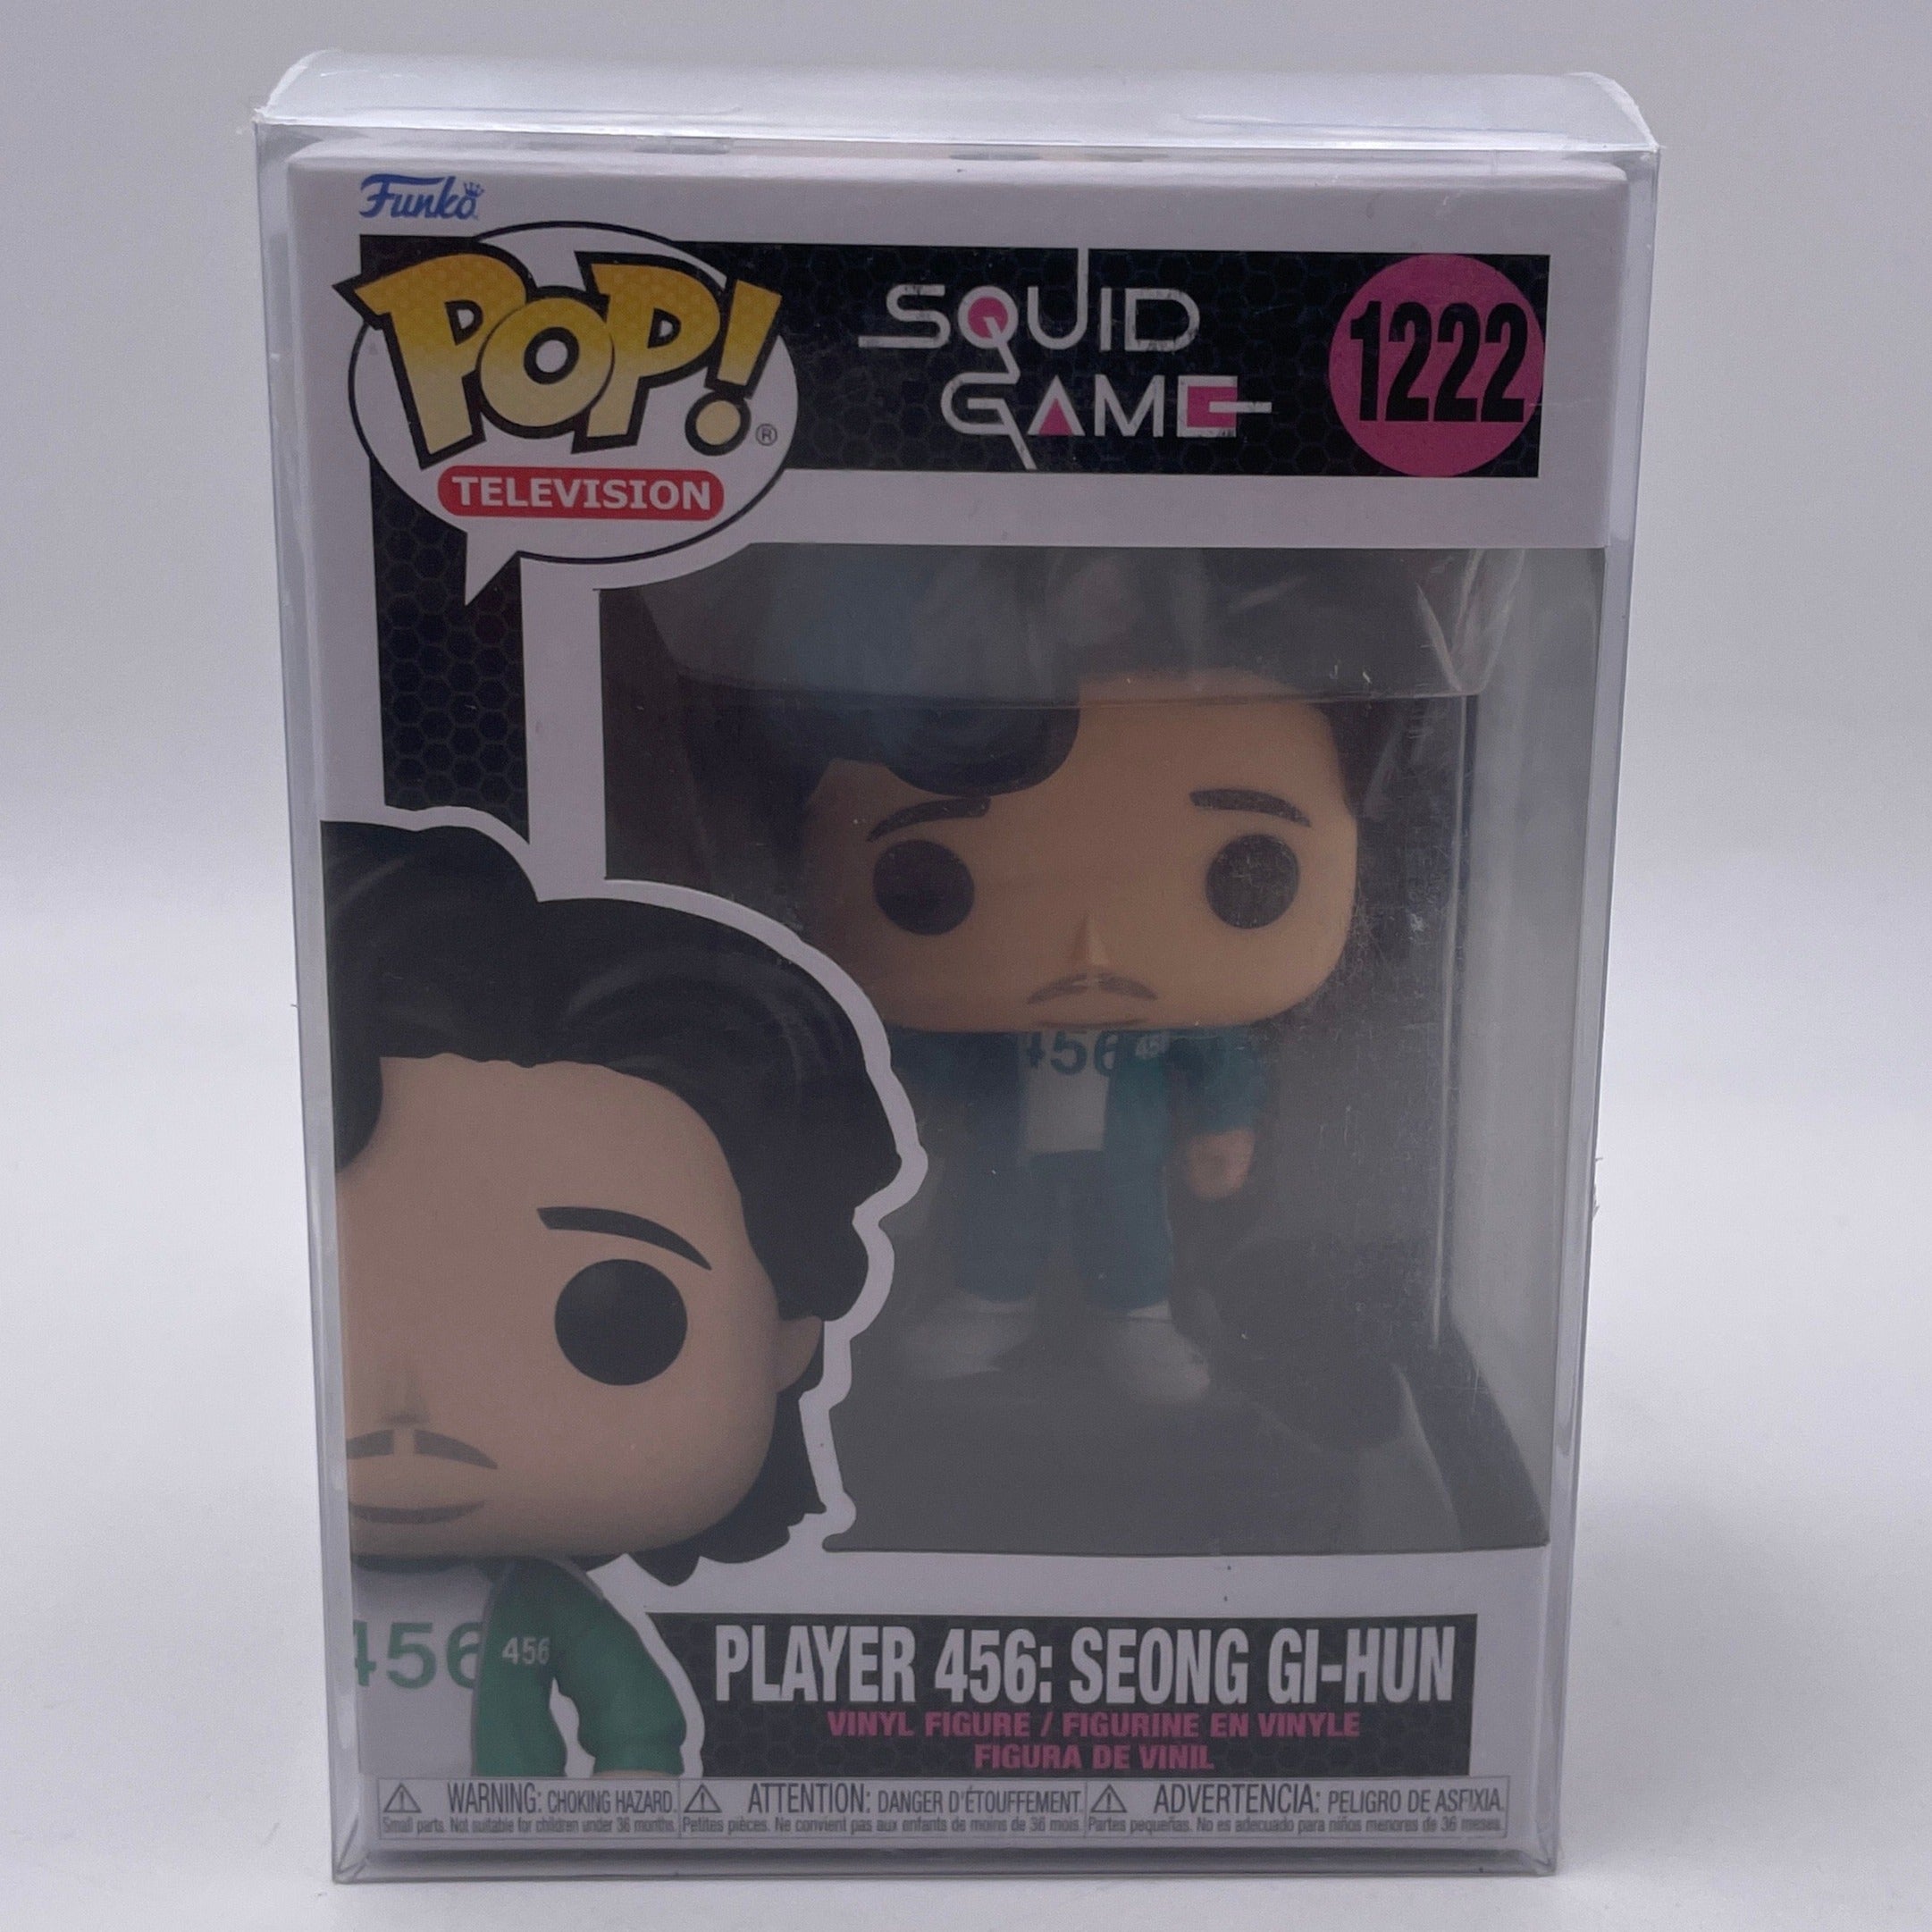 Funko Pop! Television: Squid Games-Player 456 Seong 1222